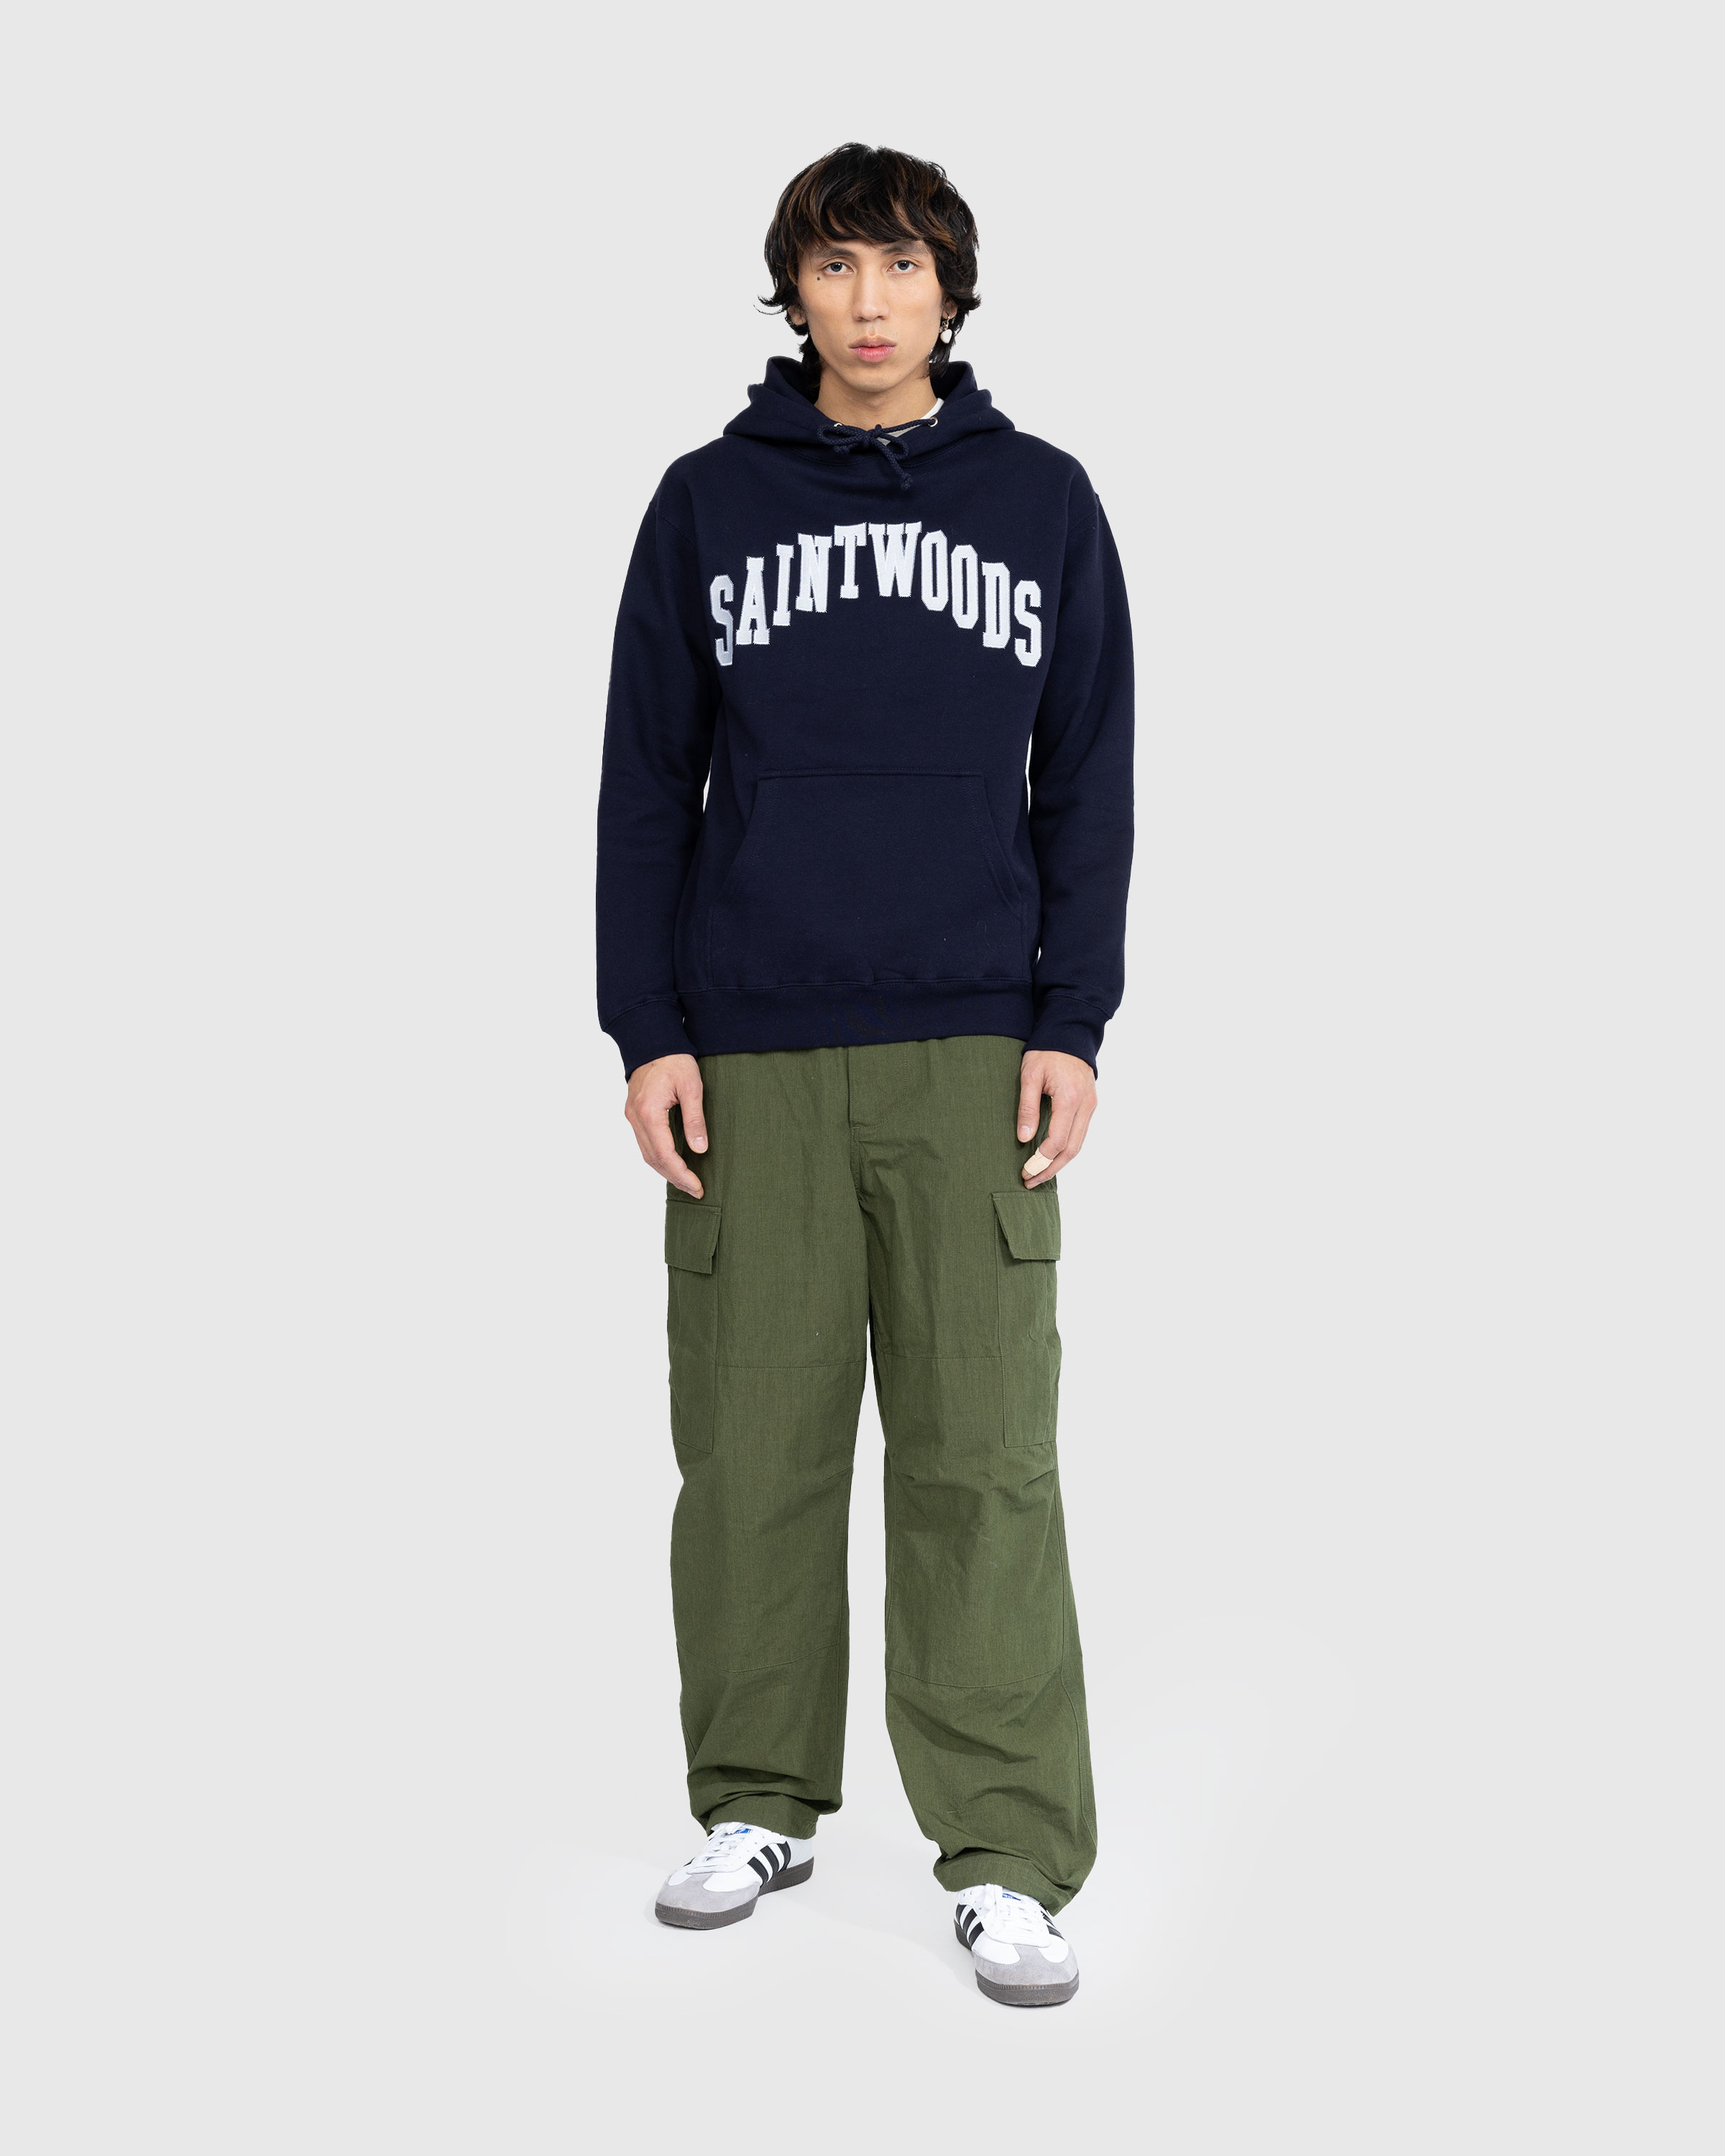 Saintwoods - Arch Hoodie Navy - Clothing - Blue - Image 3